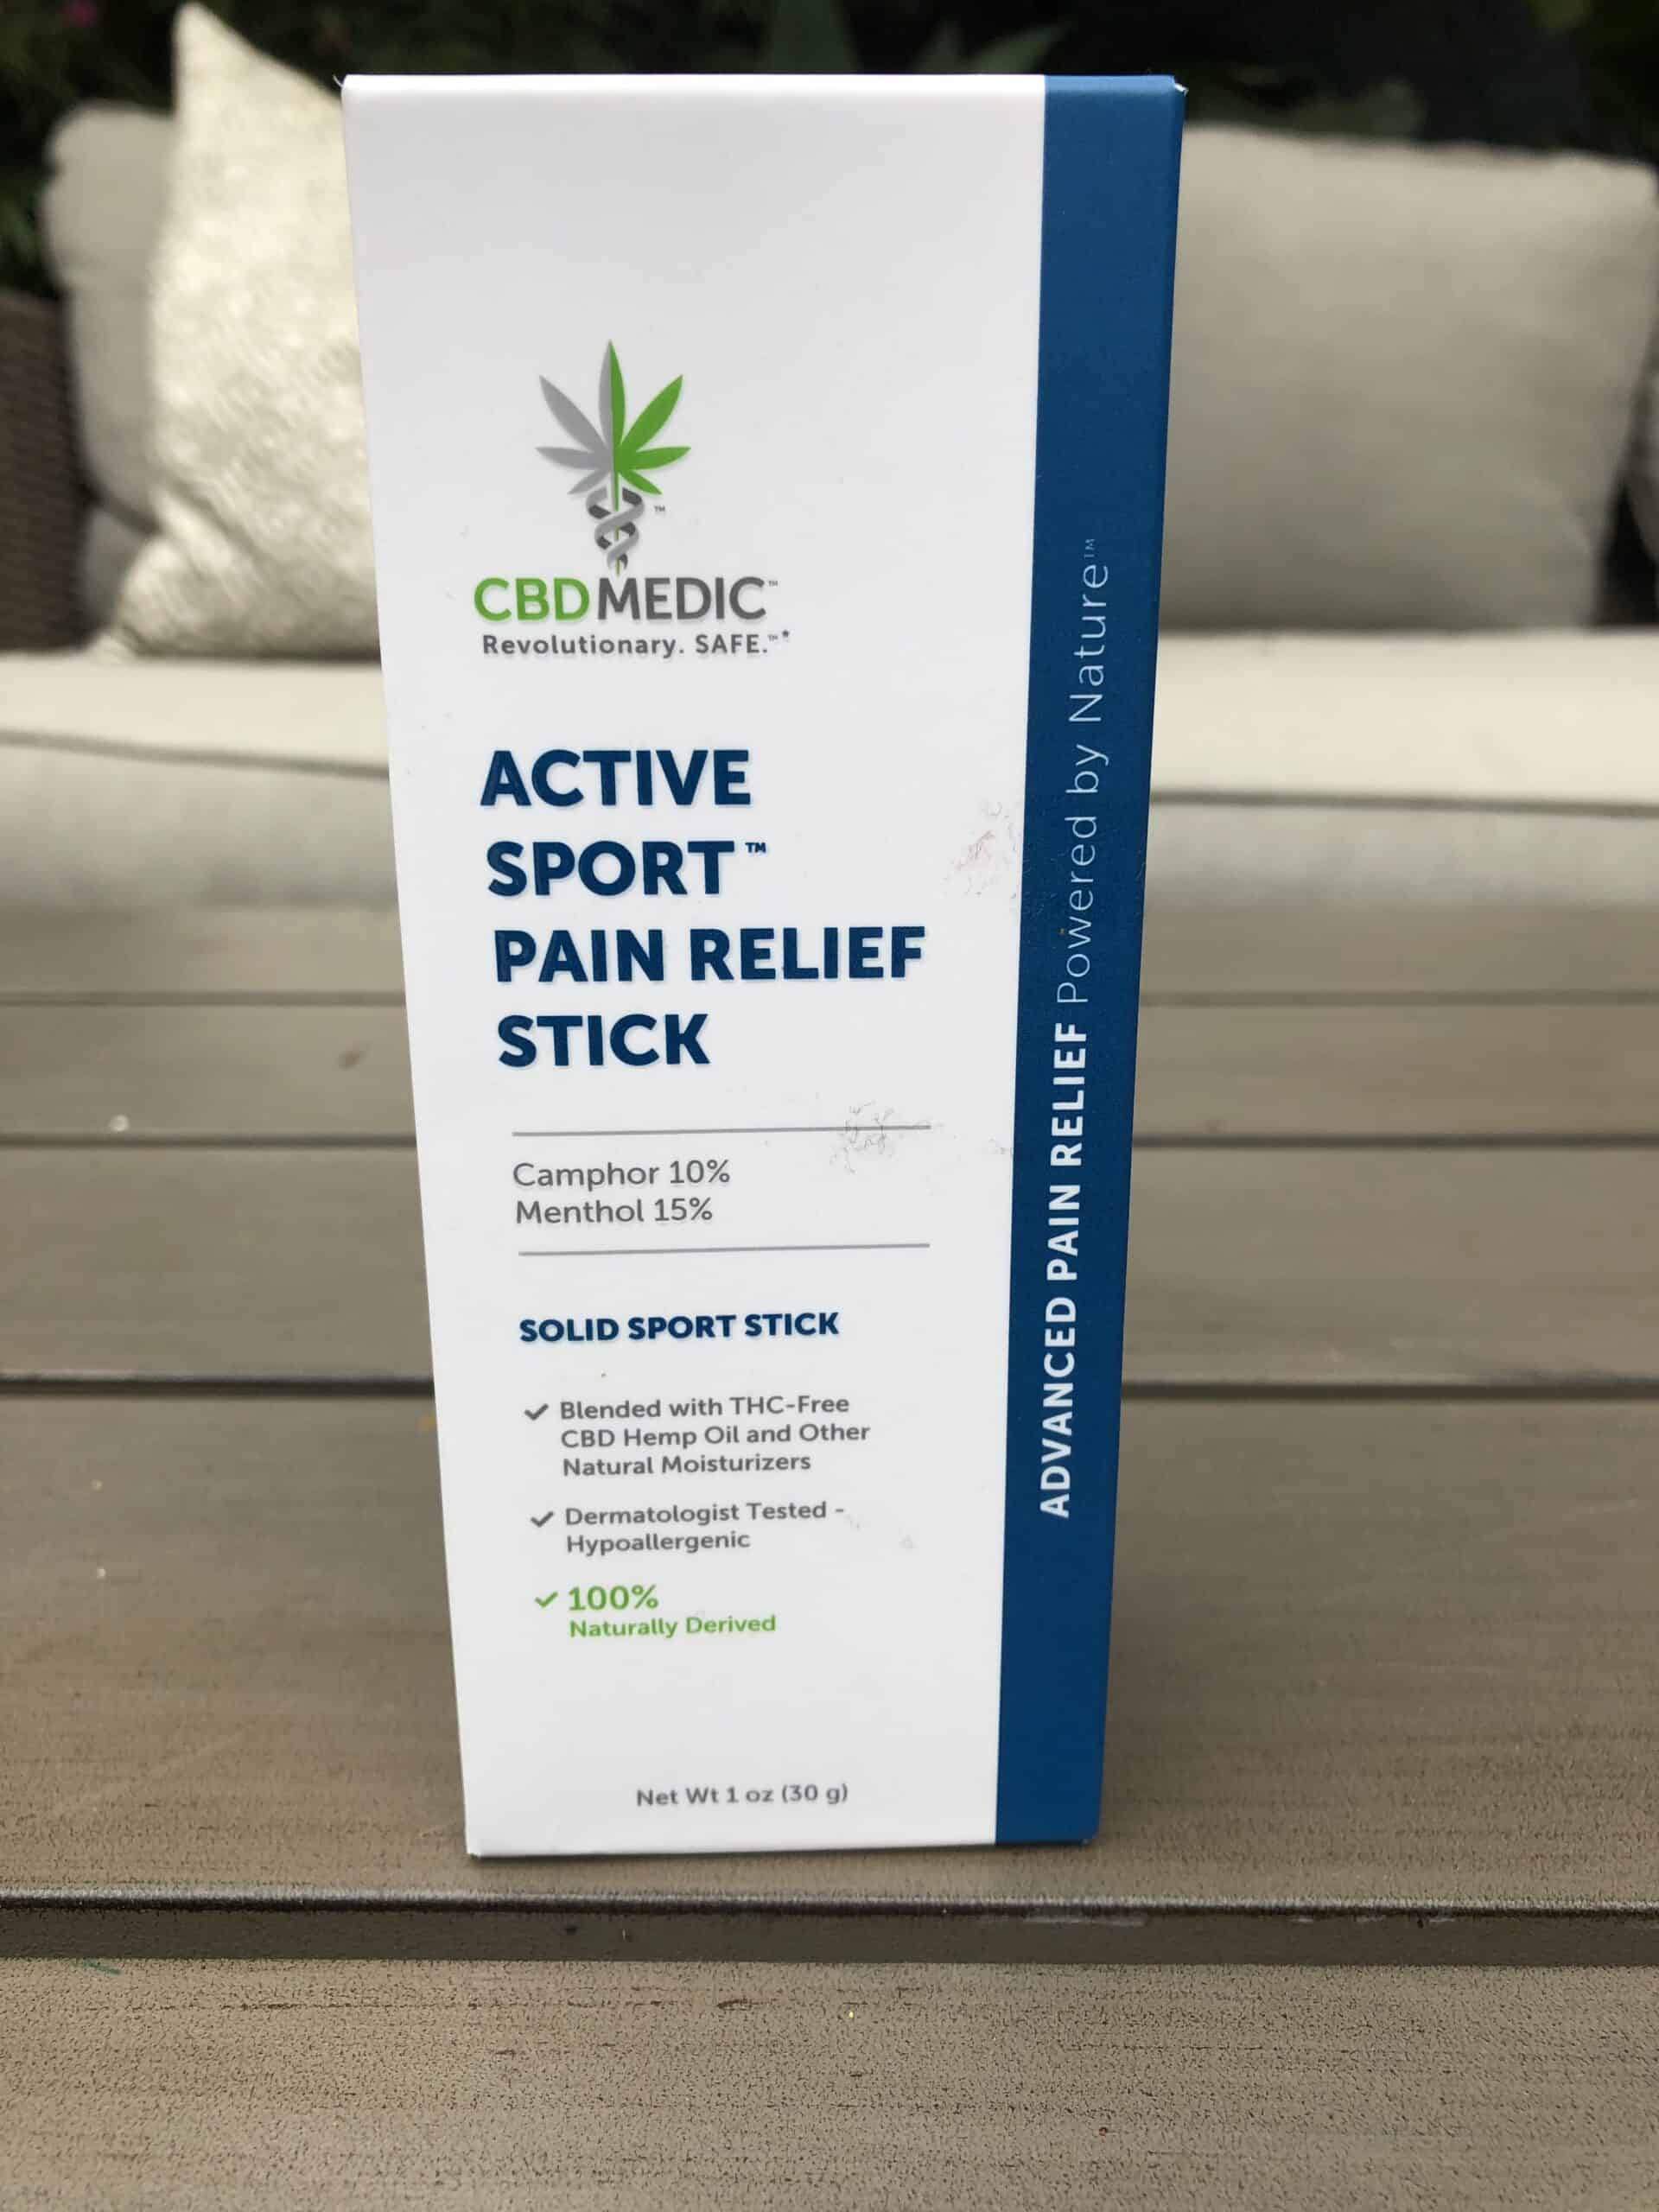 cbdmedic active sport pain relief stick name save on cannabis review